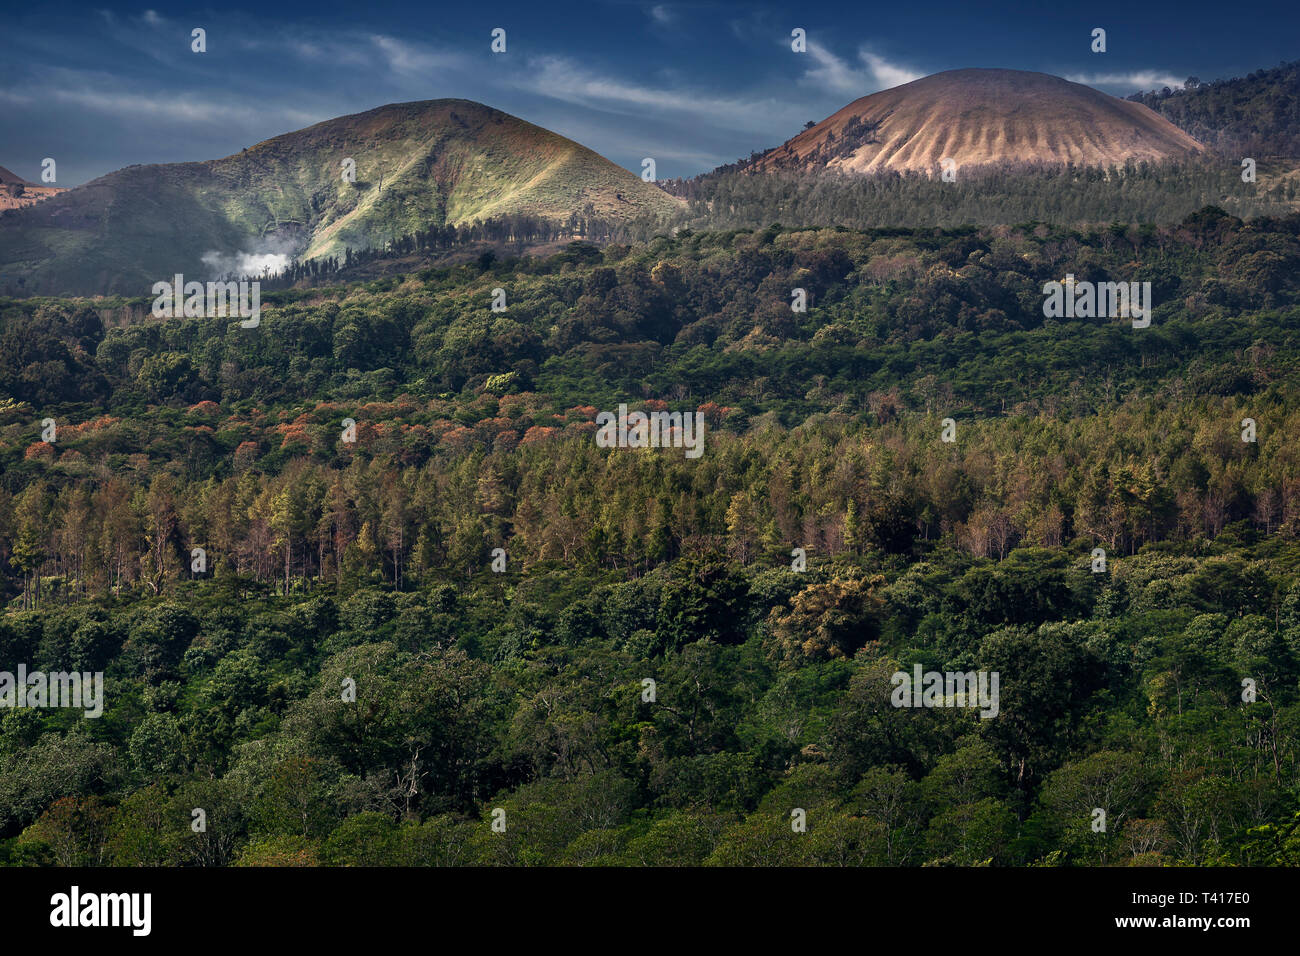 Tropical mountain and forest landscape, Indonesia Stock Photo